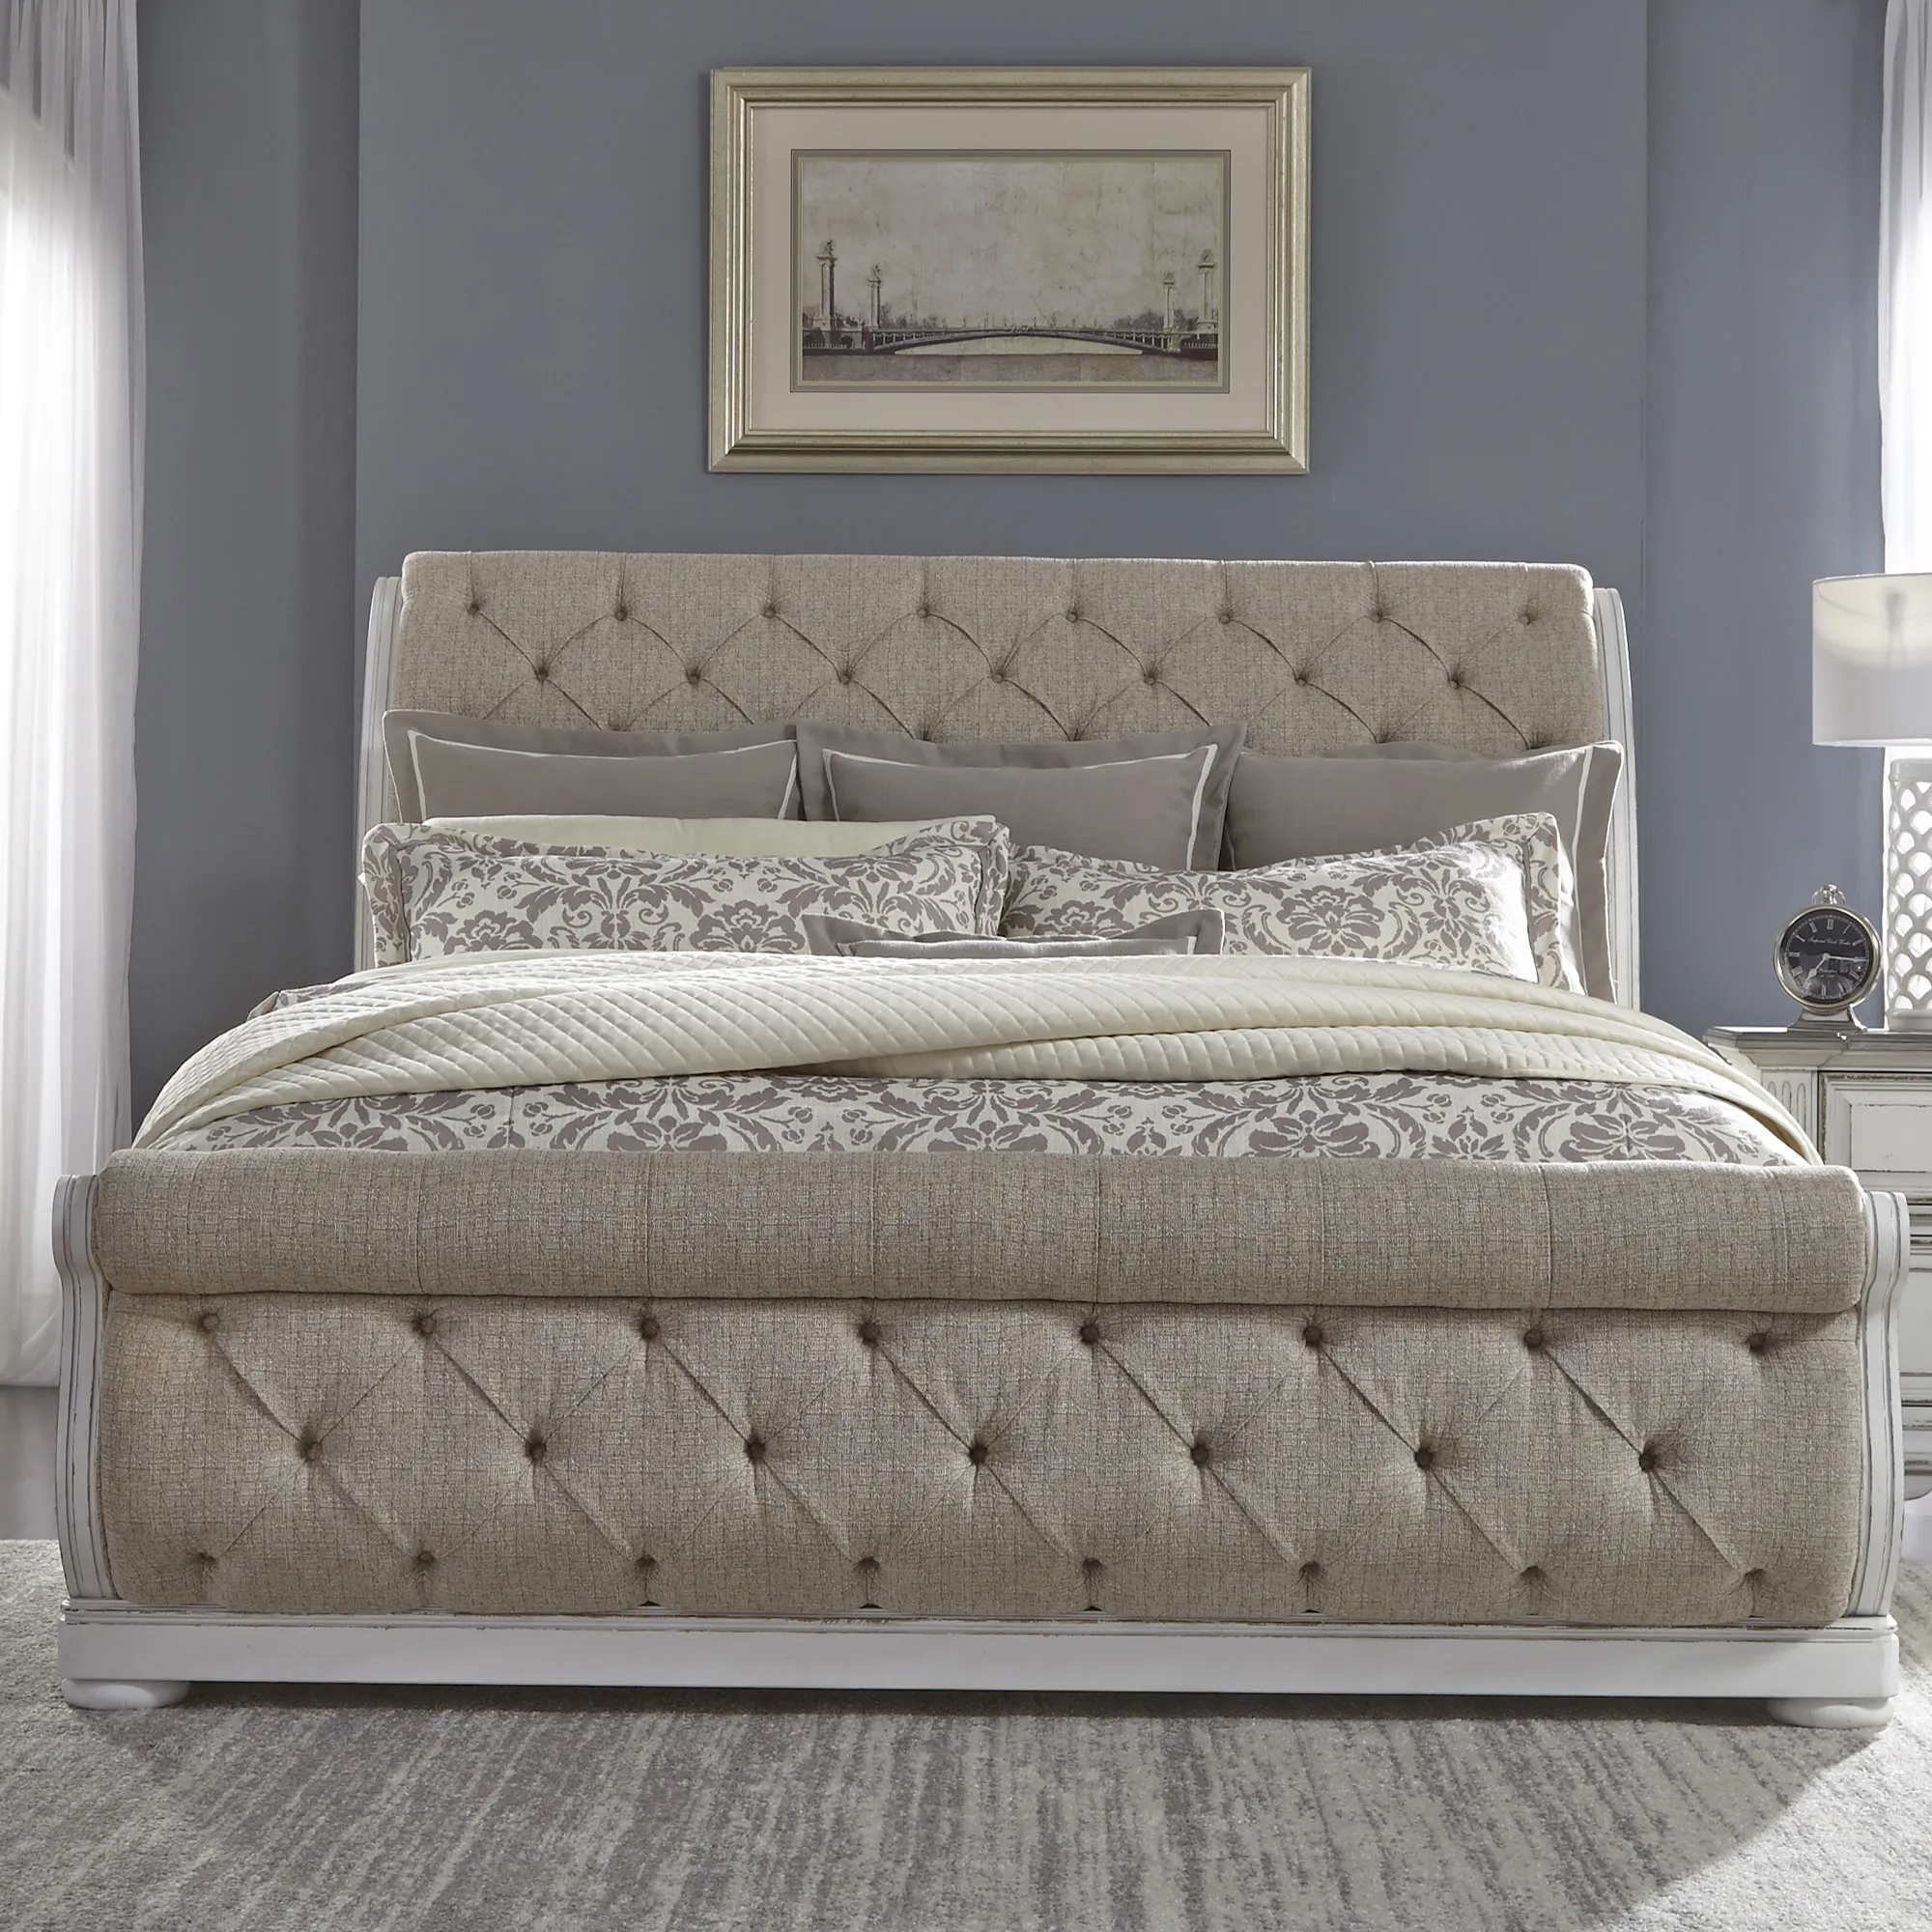 QUEEN UPHOLSTERED SLEIGH BED - ABBEY PARK